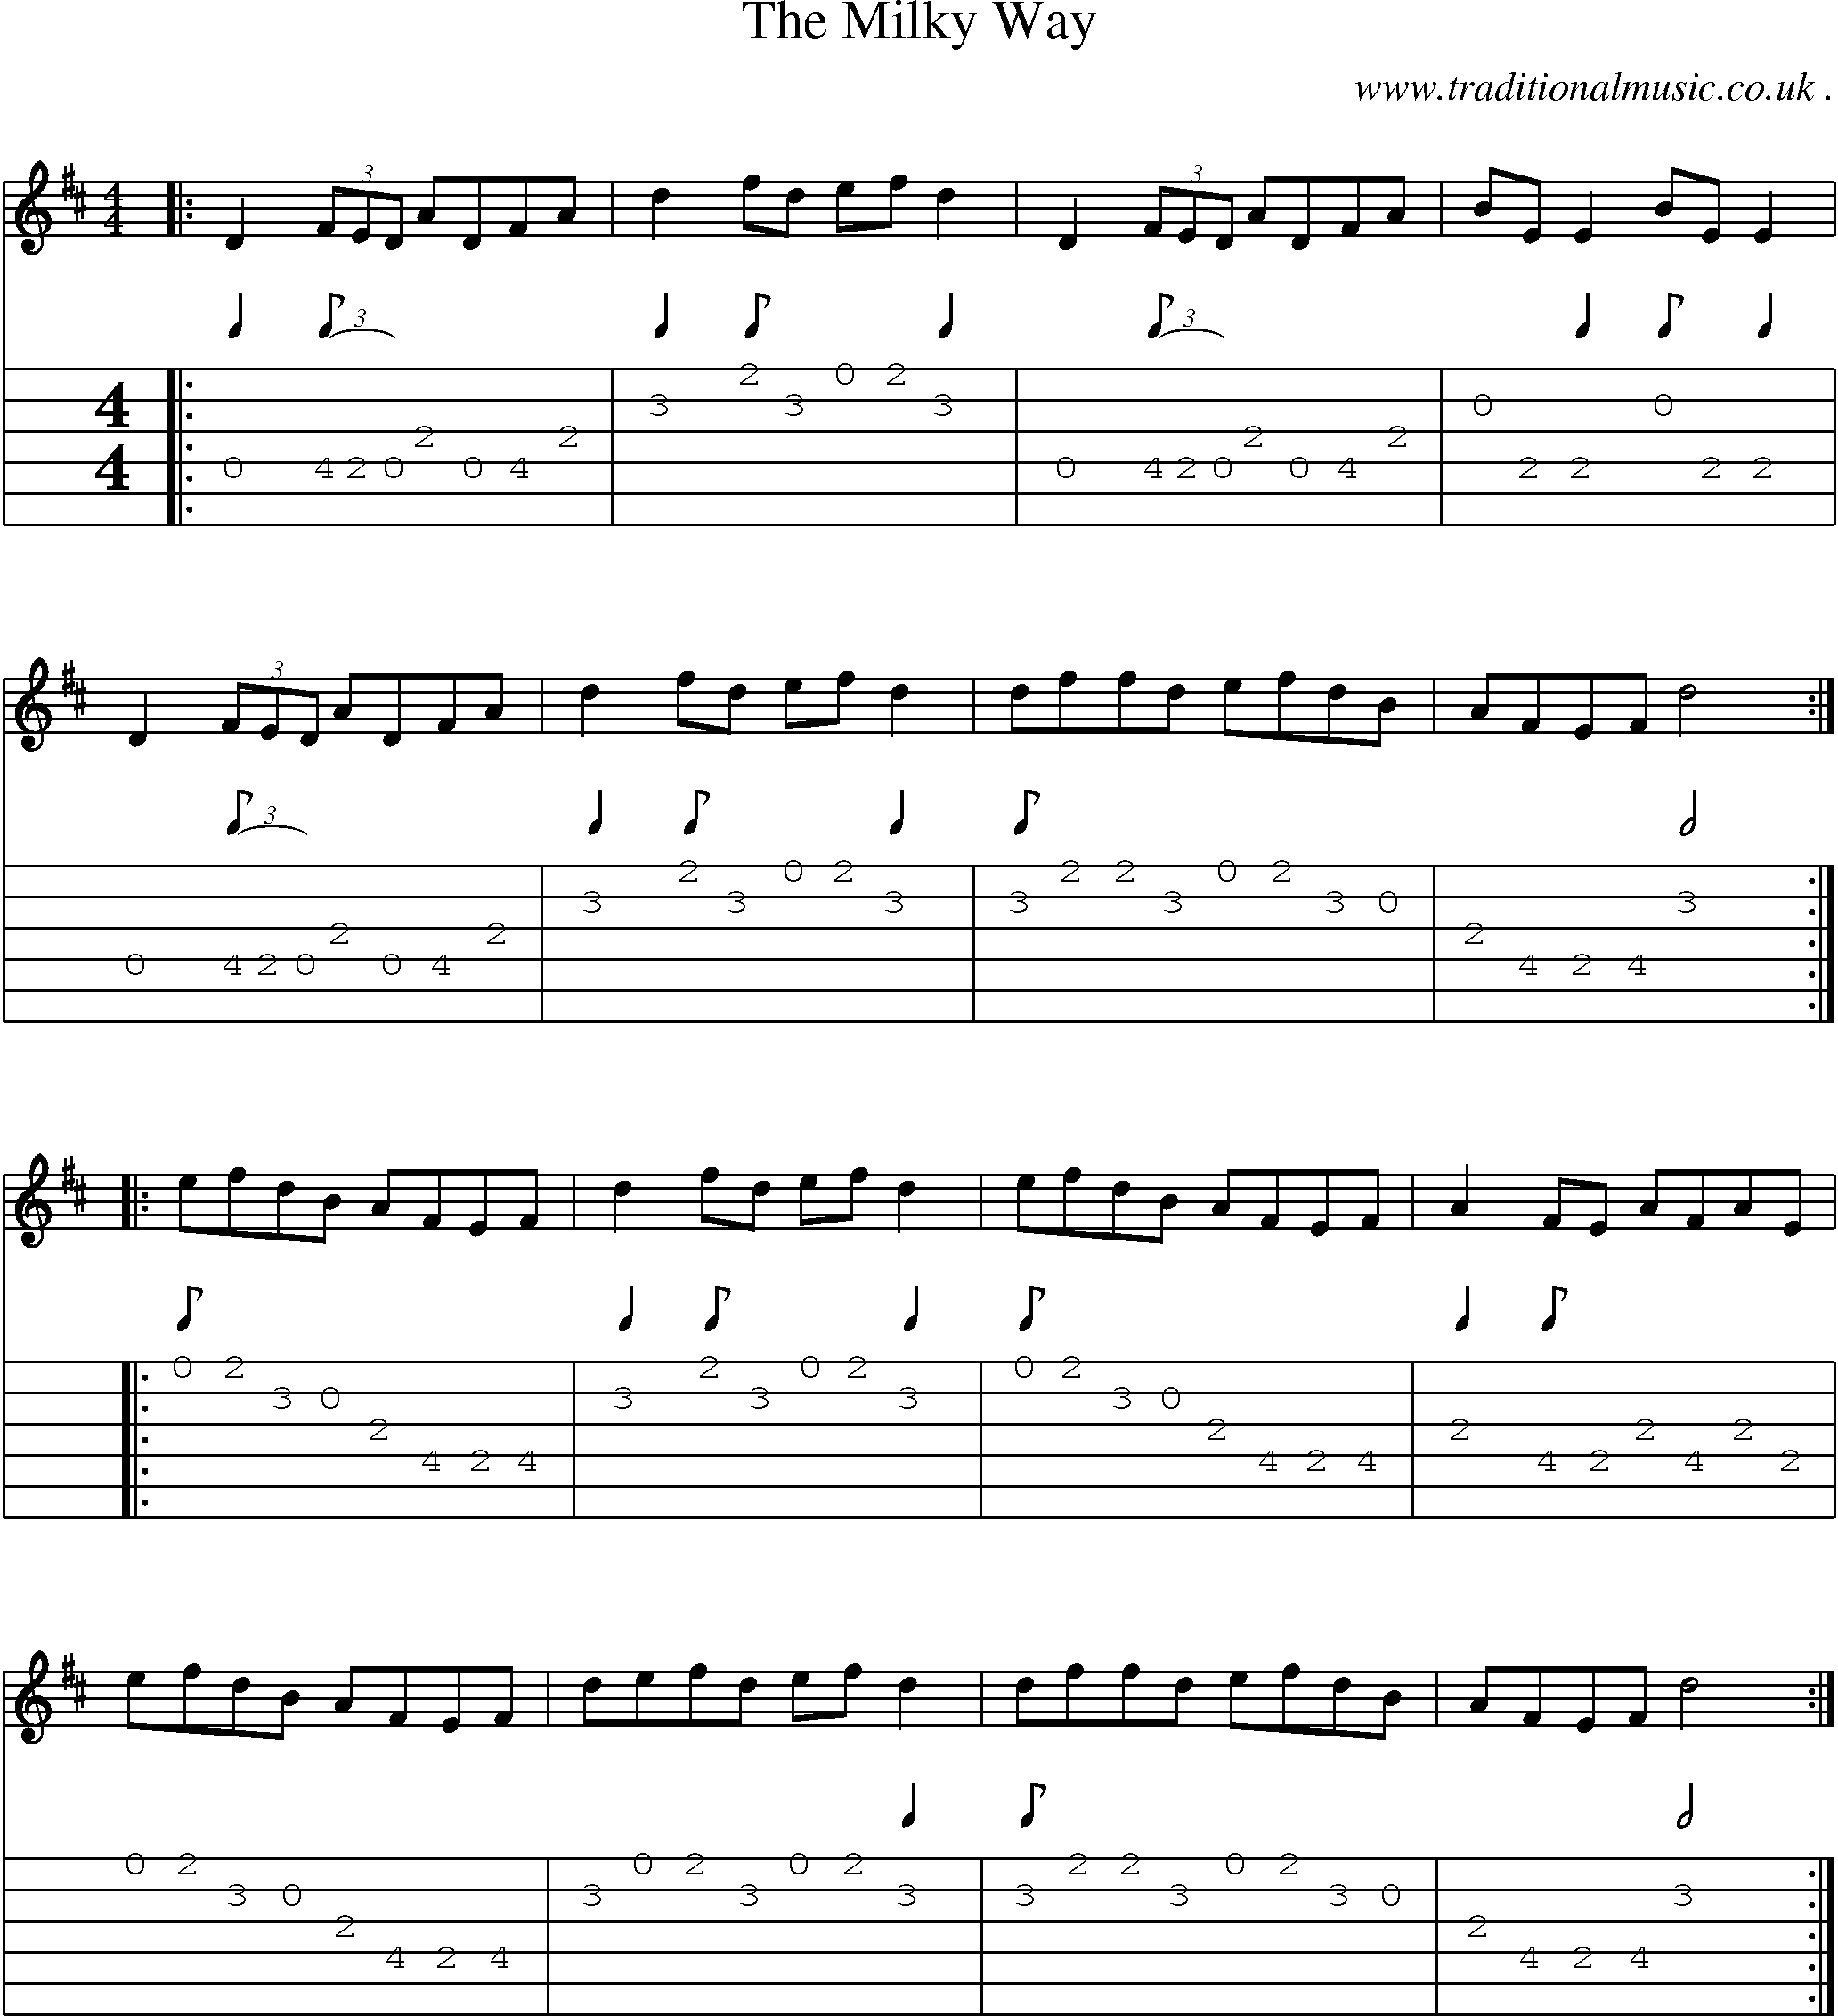 Sheet-Music and Guitar Tabs for The Milky Way